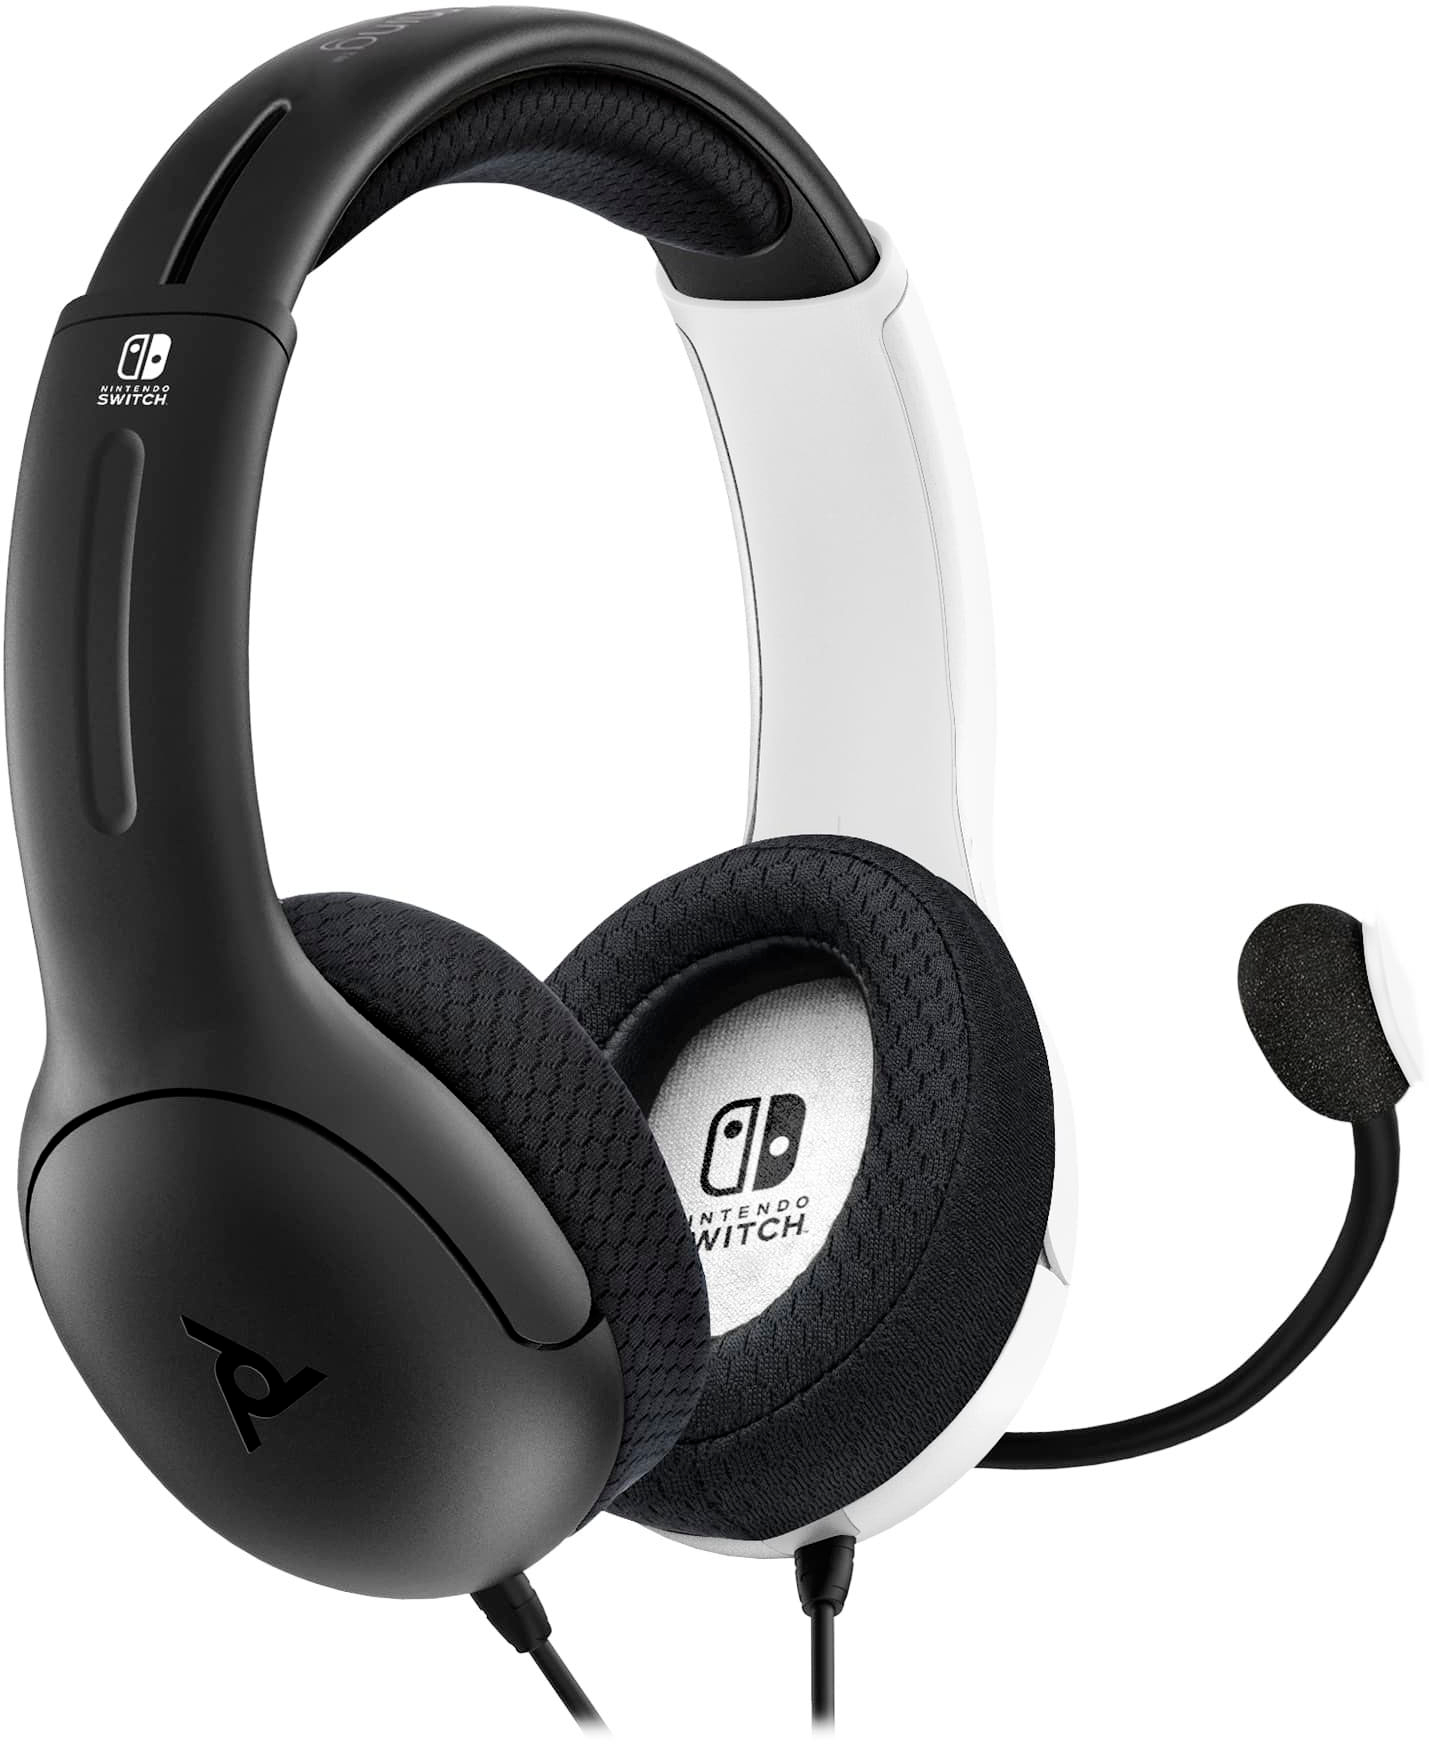 PDP Gaming Airlite Stereo Headset Wired